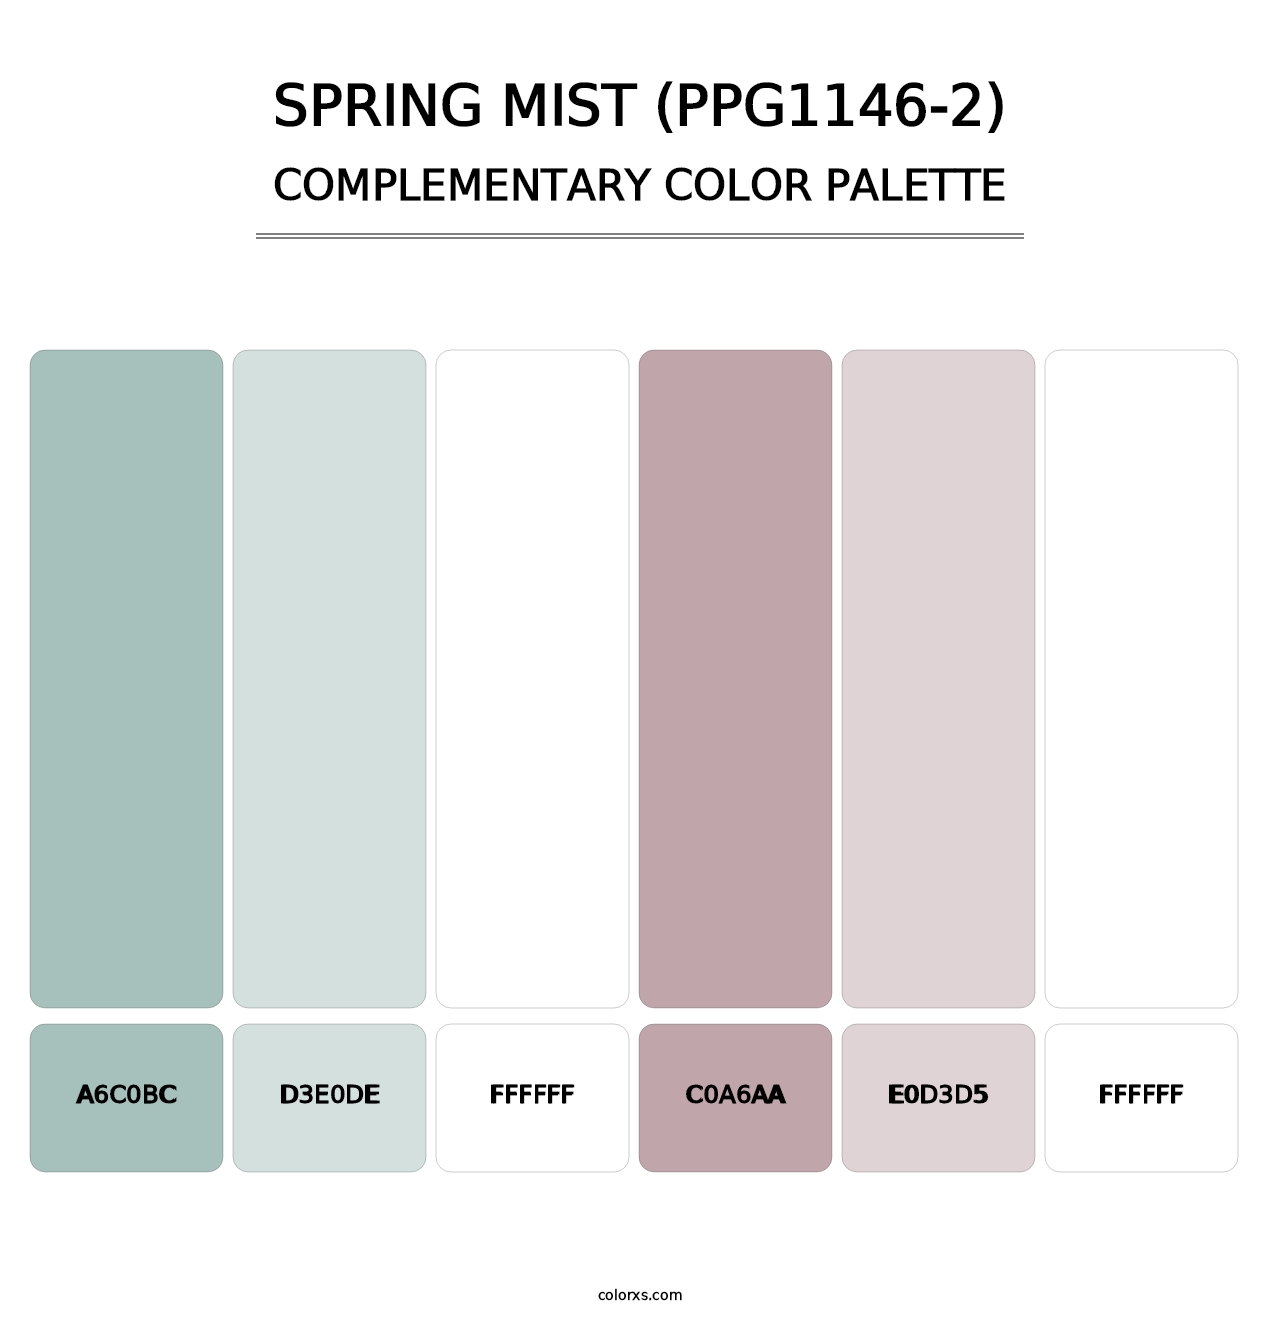 Spring Mist (PPG1146-2) - Complementary Color Palette